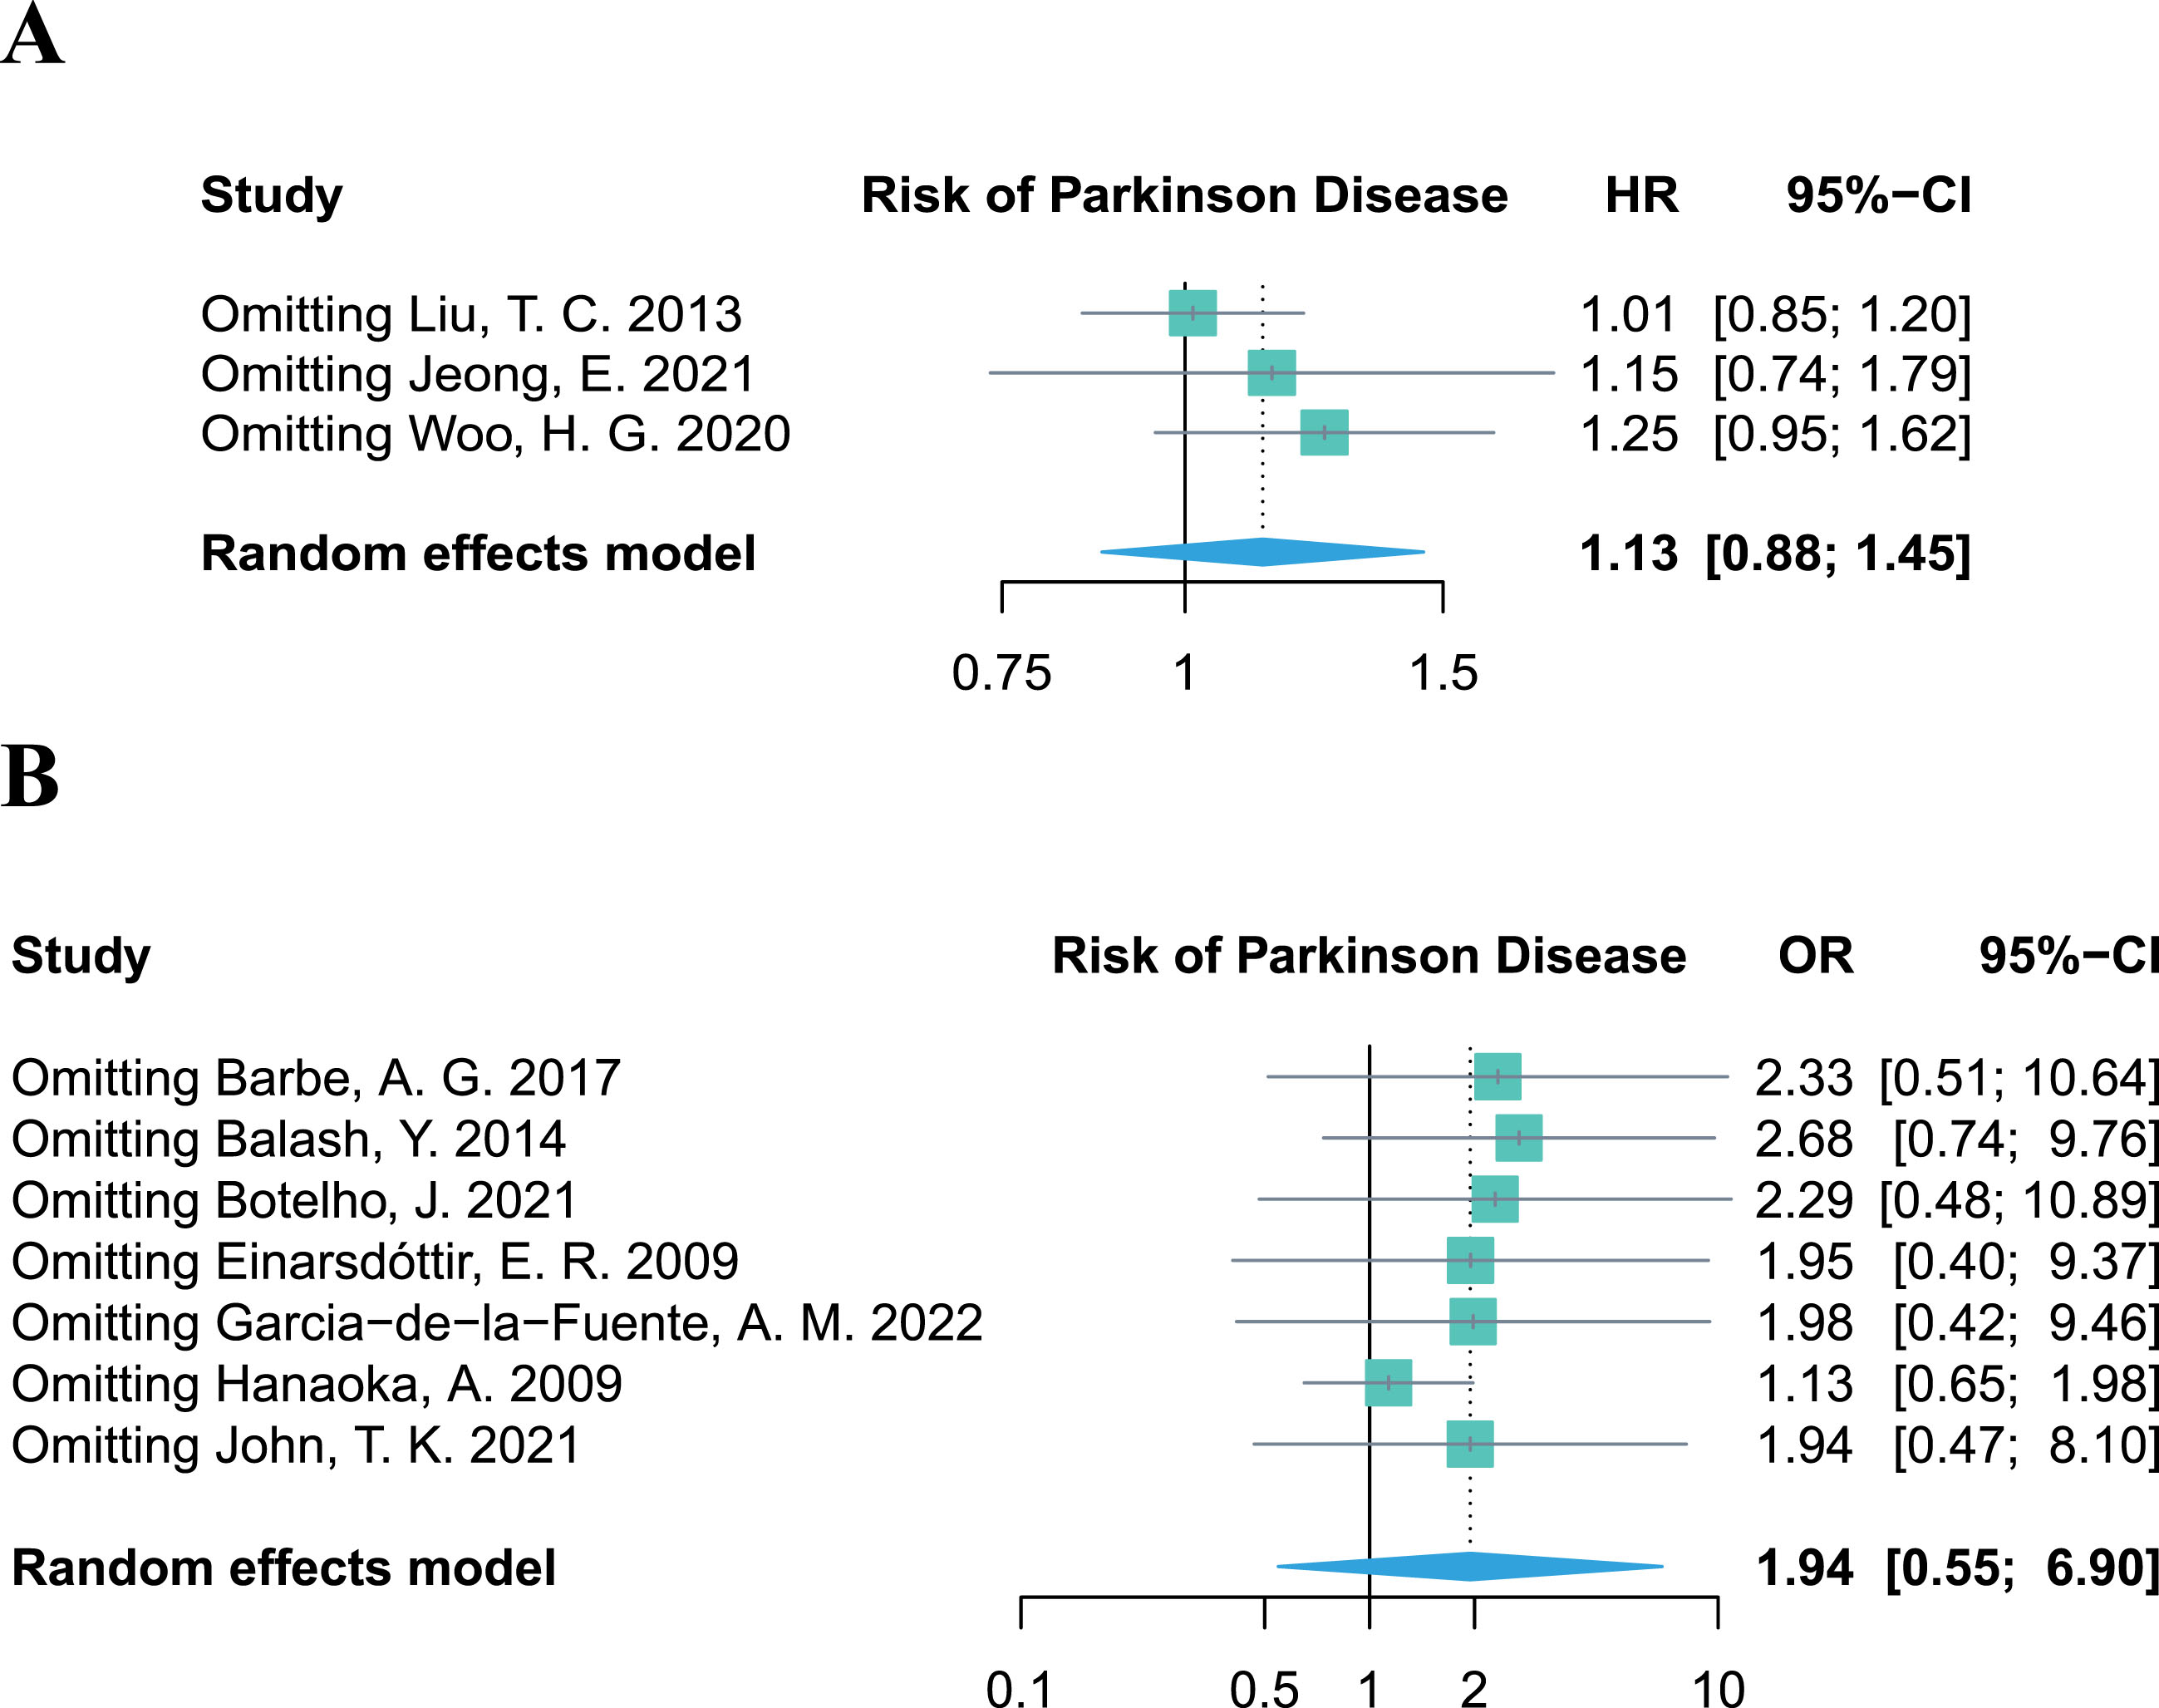 Leave-one-out sensitivity analysis of studies focusing on periodontitis and the risk of Parkinson’s disease.